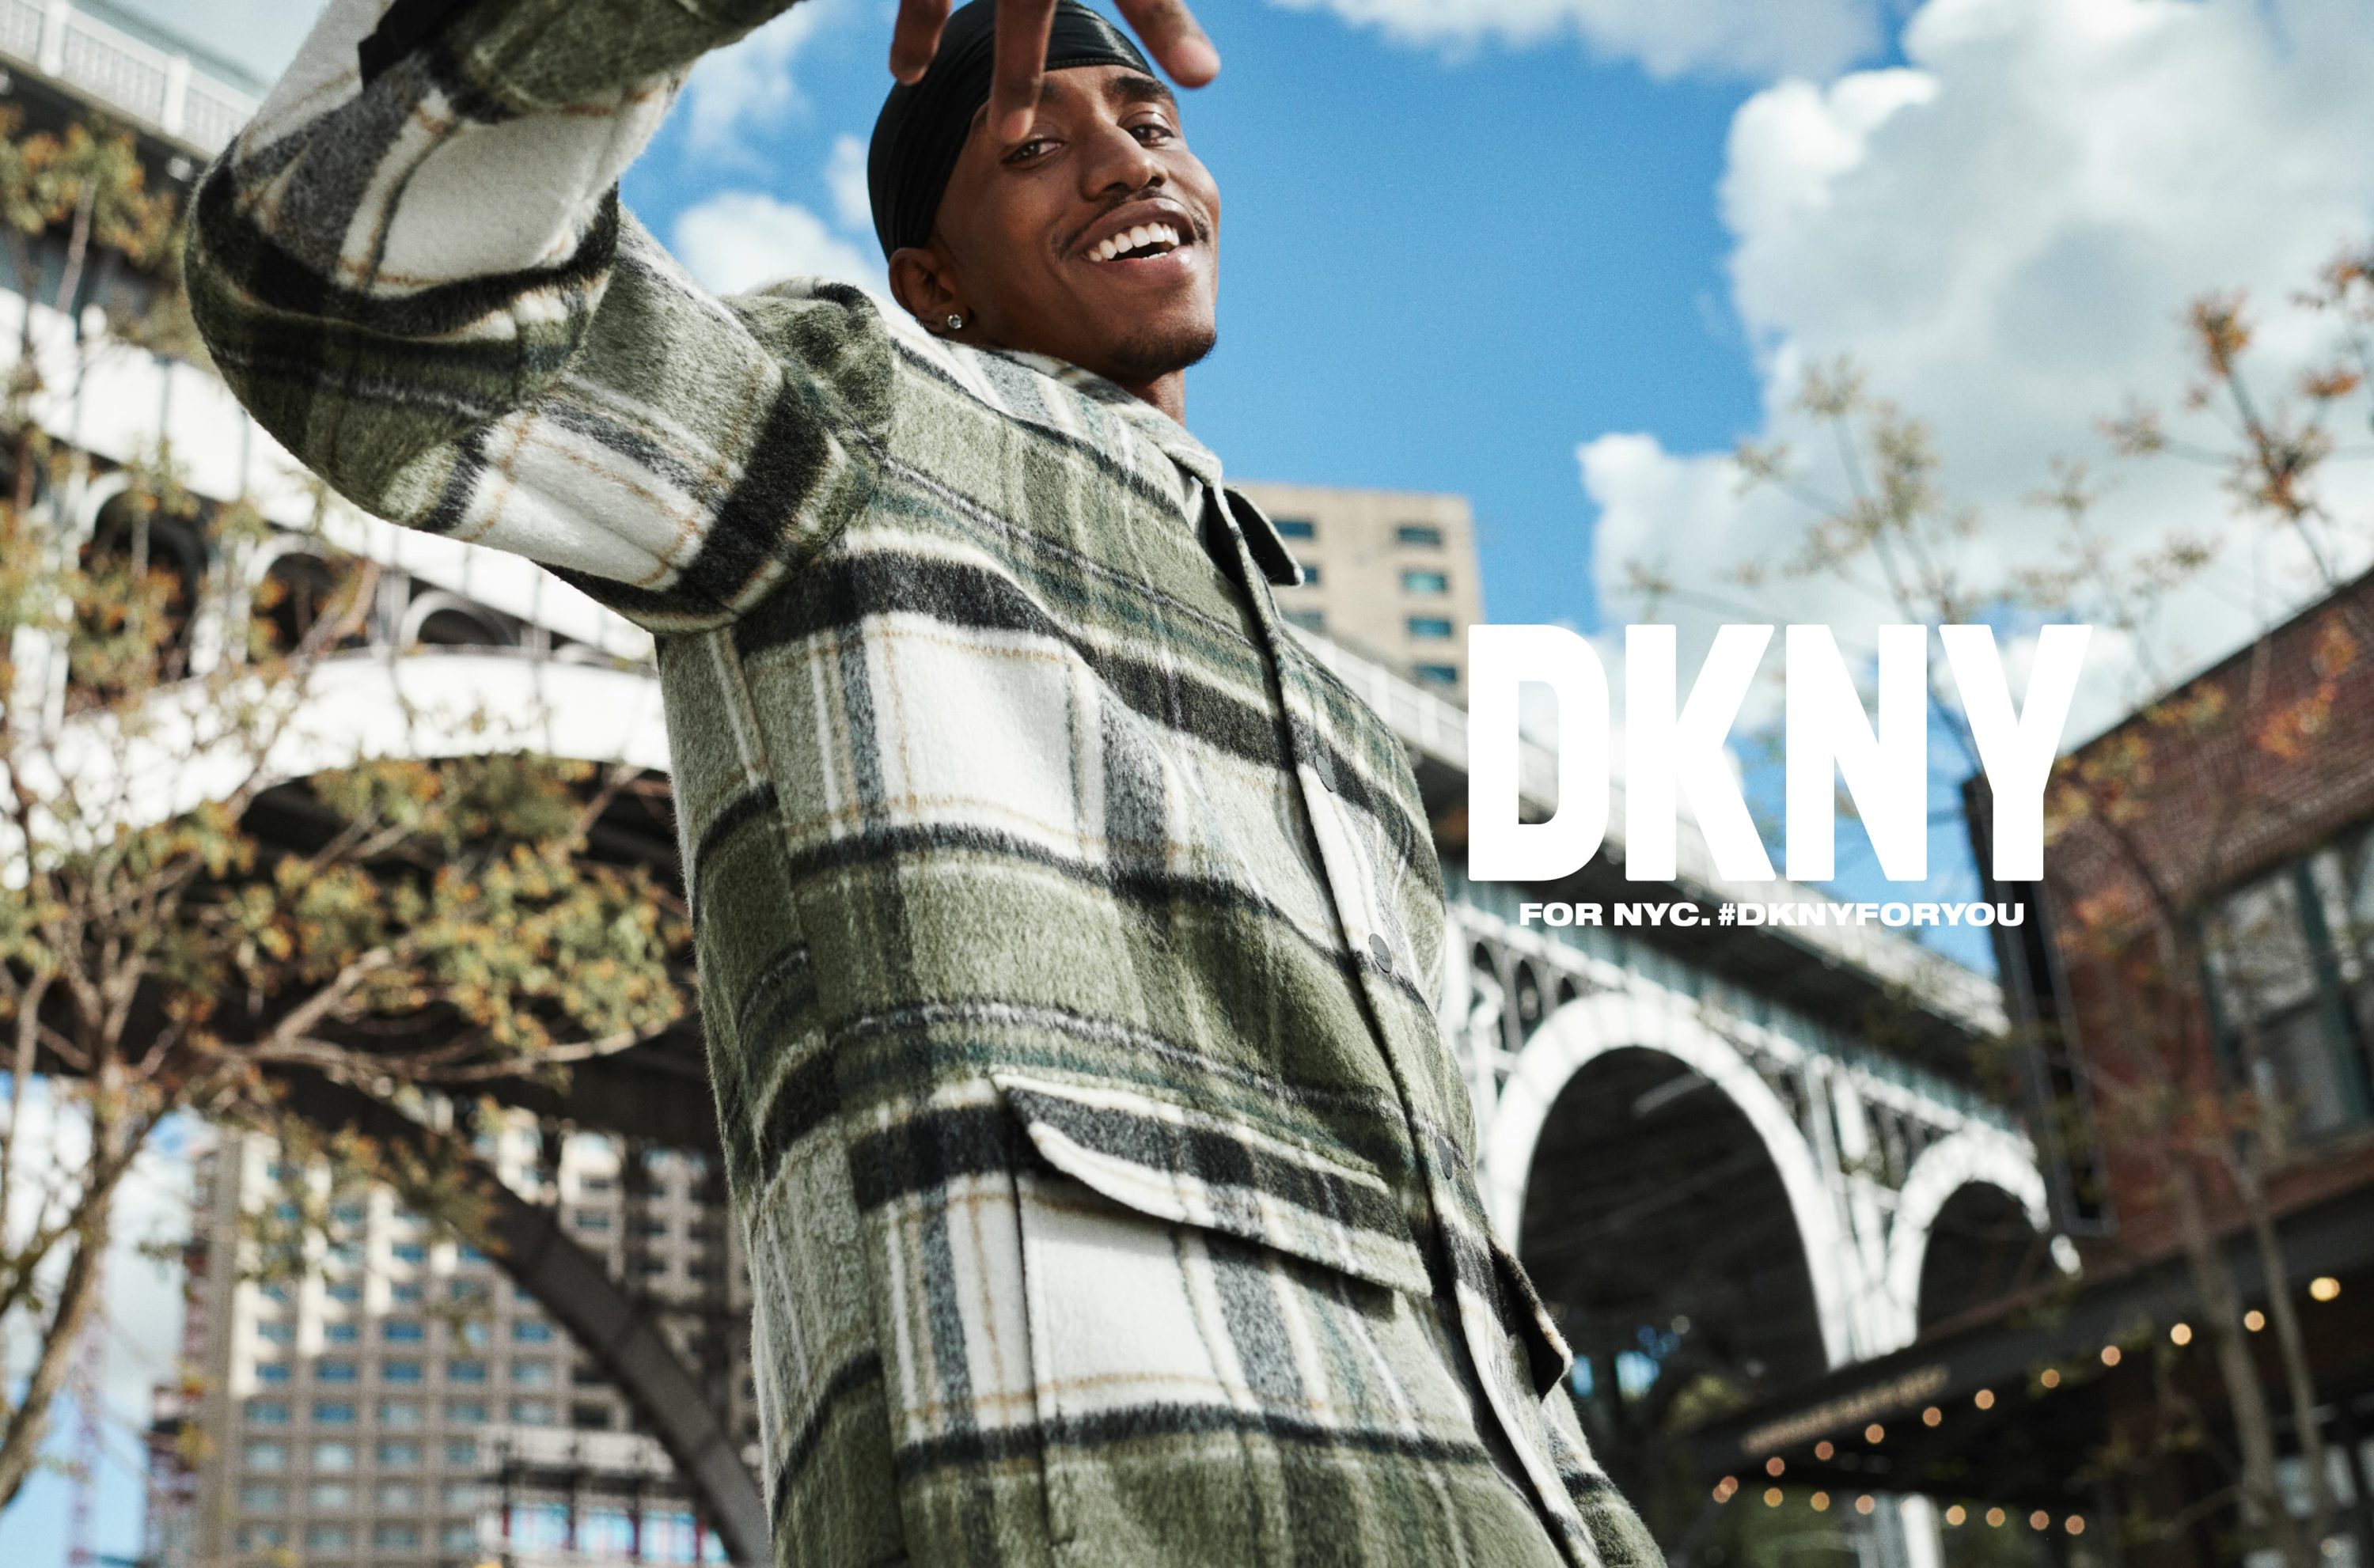 Get to know DKNY's brand new campaign for Spring 2023 - IEVENTS.ETC